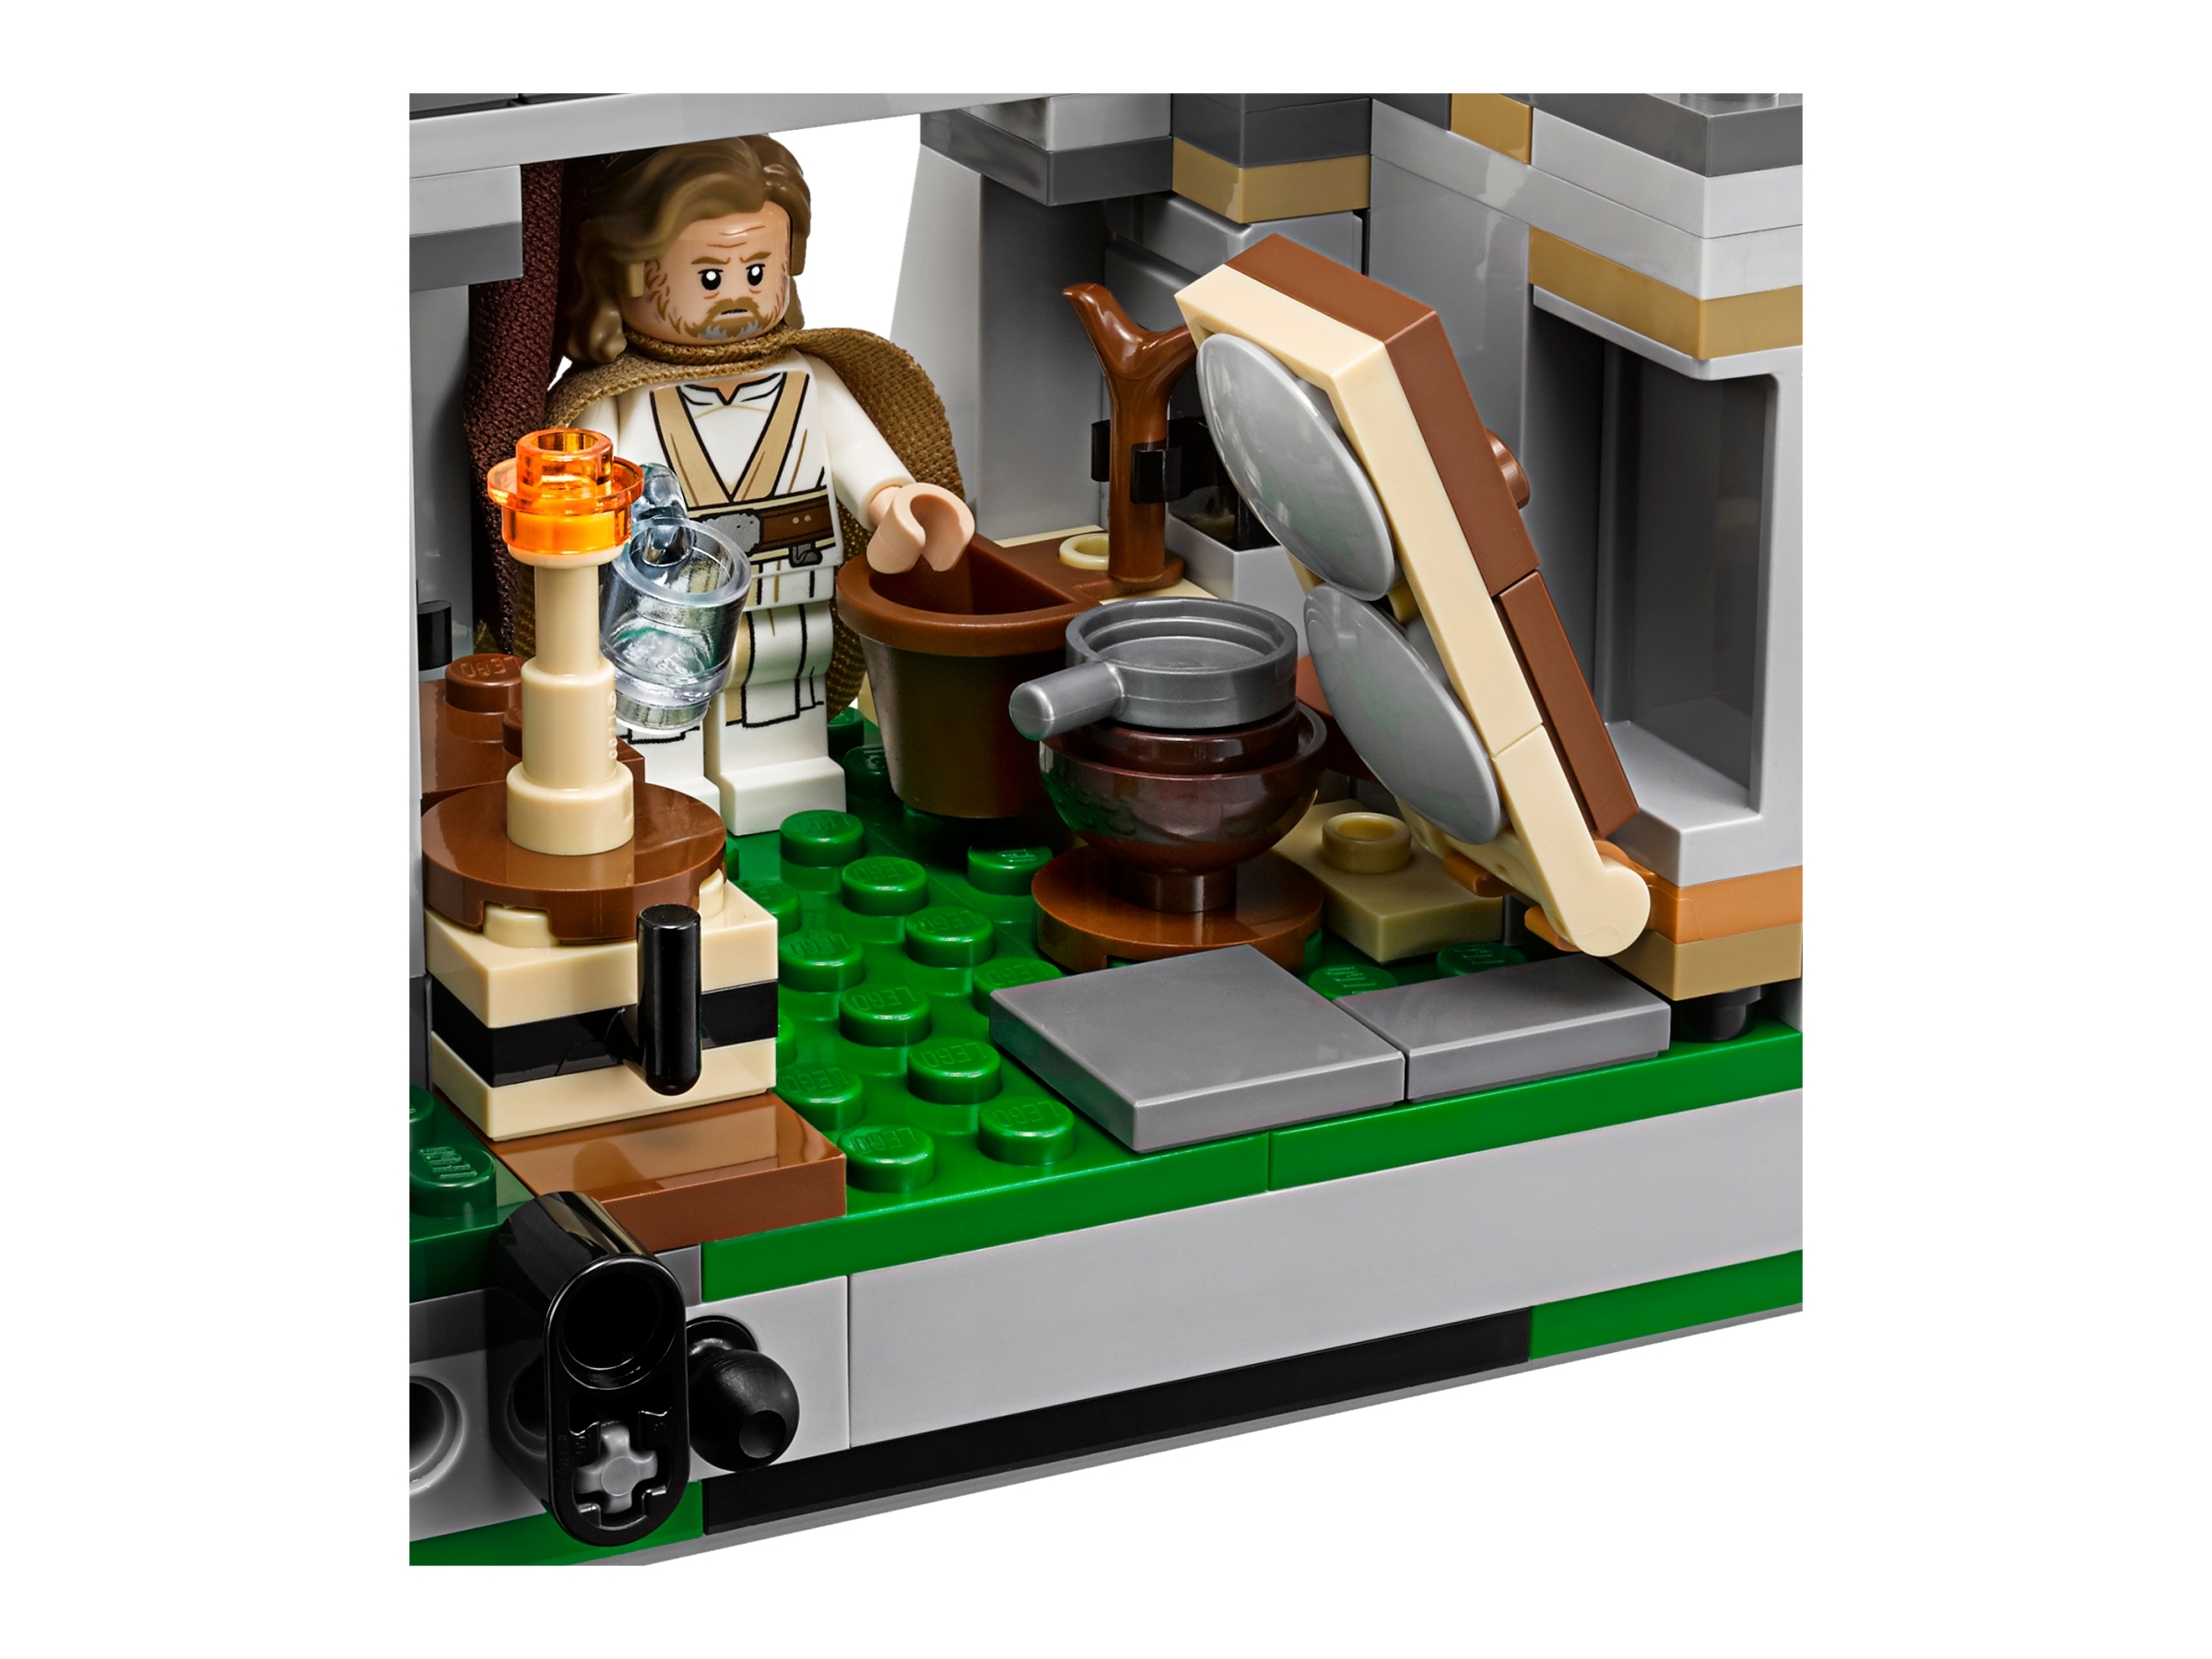 Ahch-To Island™ Training 75200 | Star Wars™ Buy online at the Official LEGO® Shop